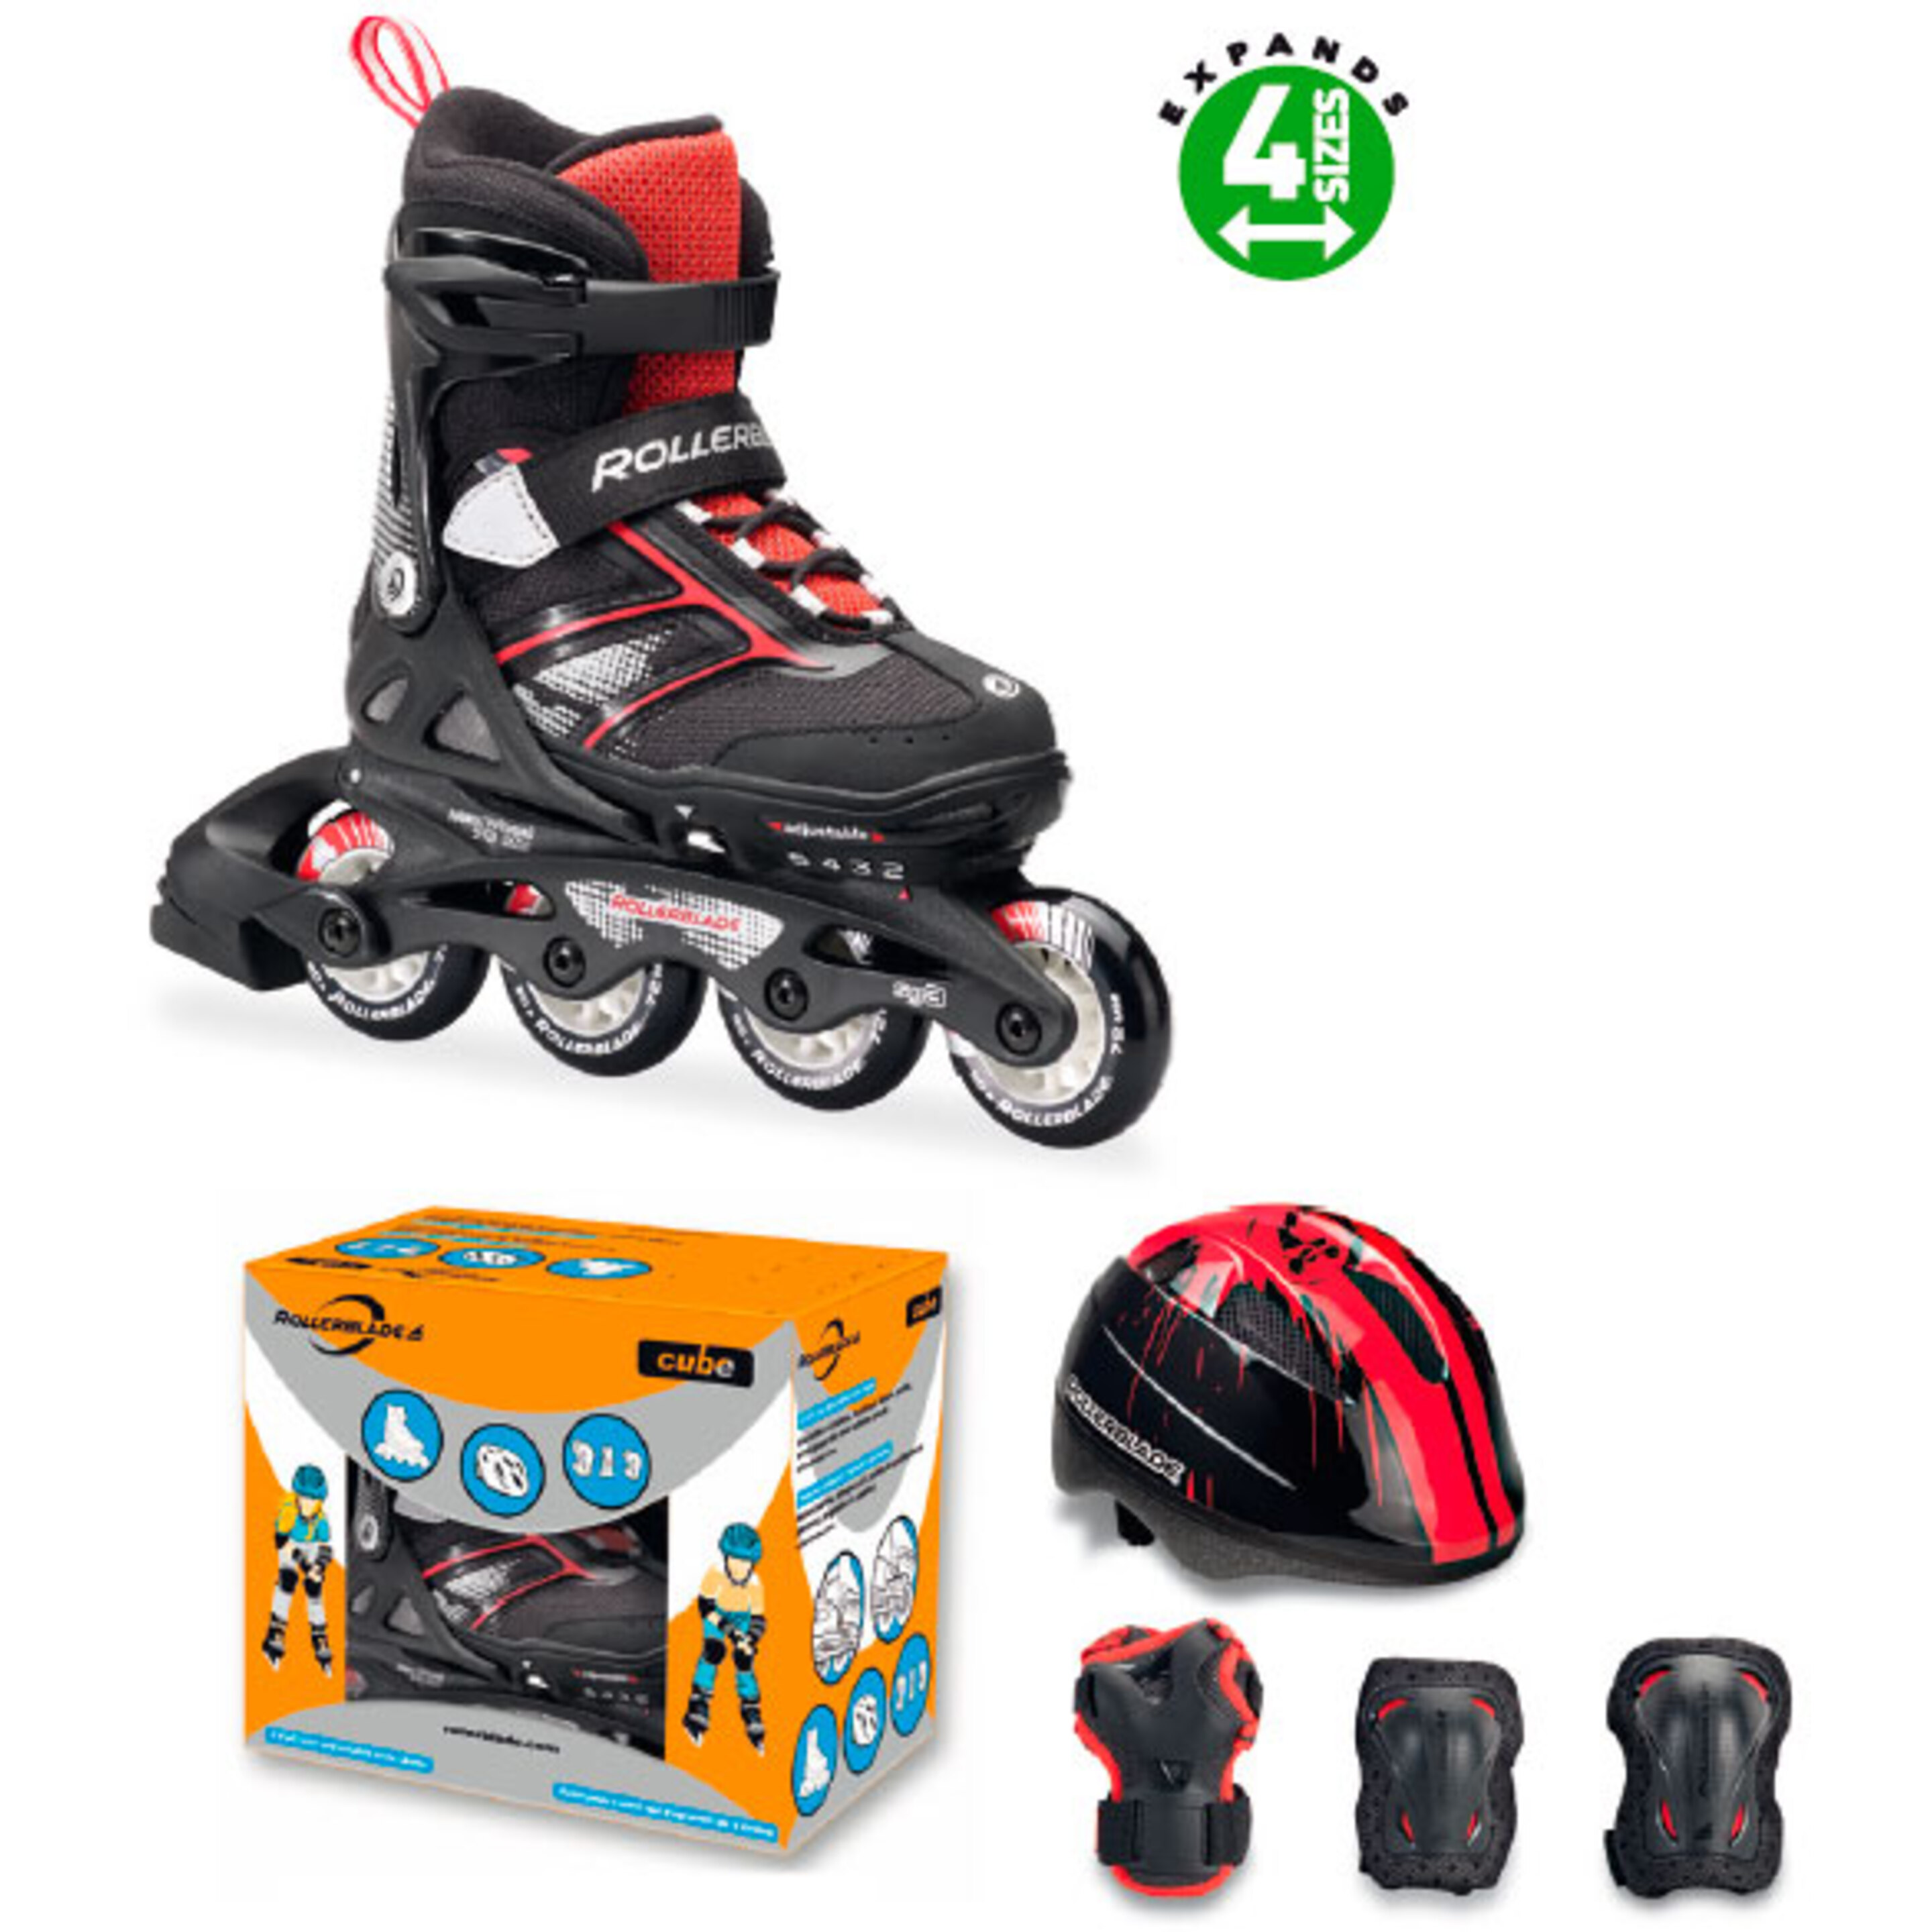 Patines Spitfire Cube Rollerblade